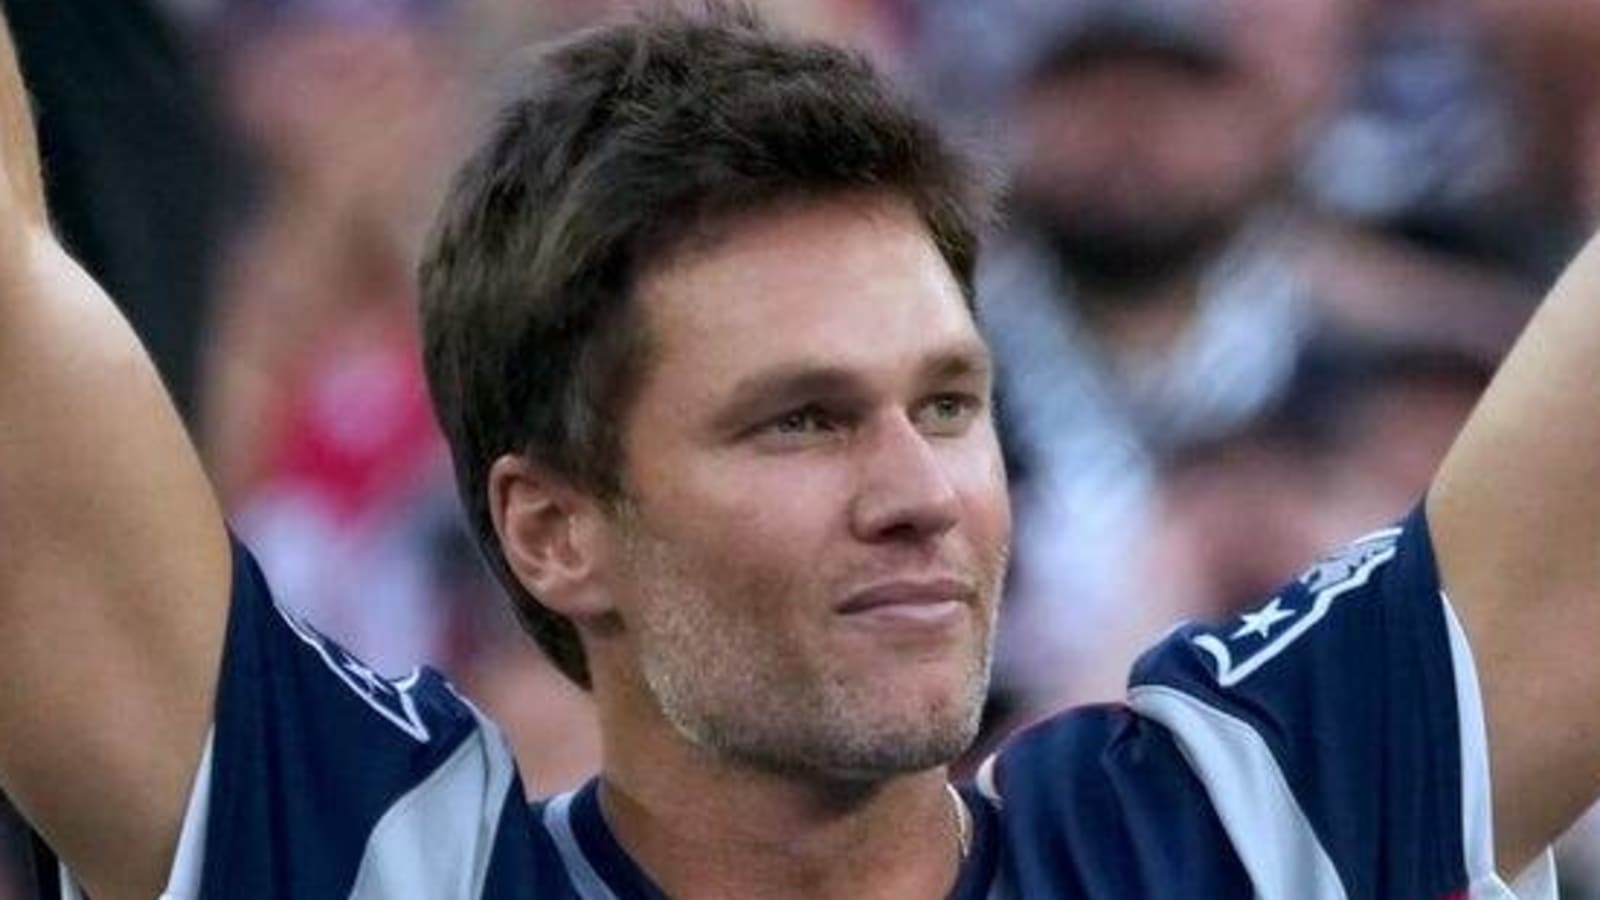 Tom Brady surprises with a wild 9/11 joke targeting Drew Bledsoe at the roast event